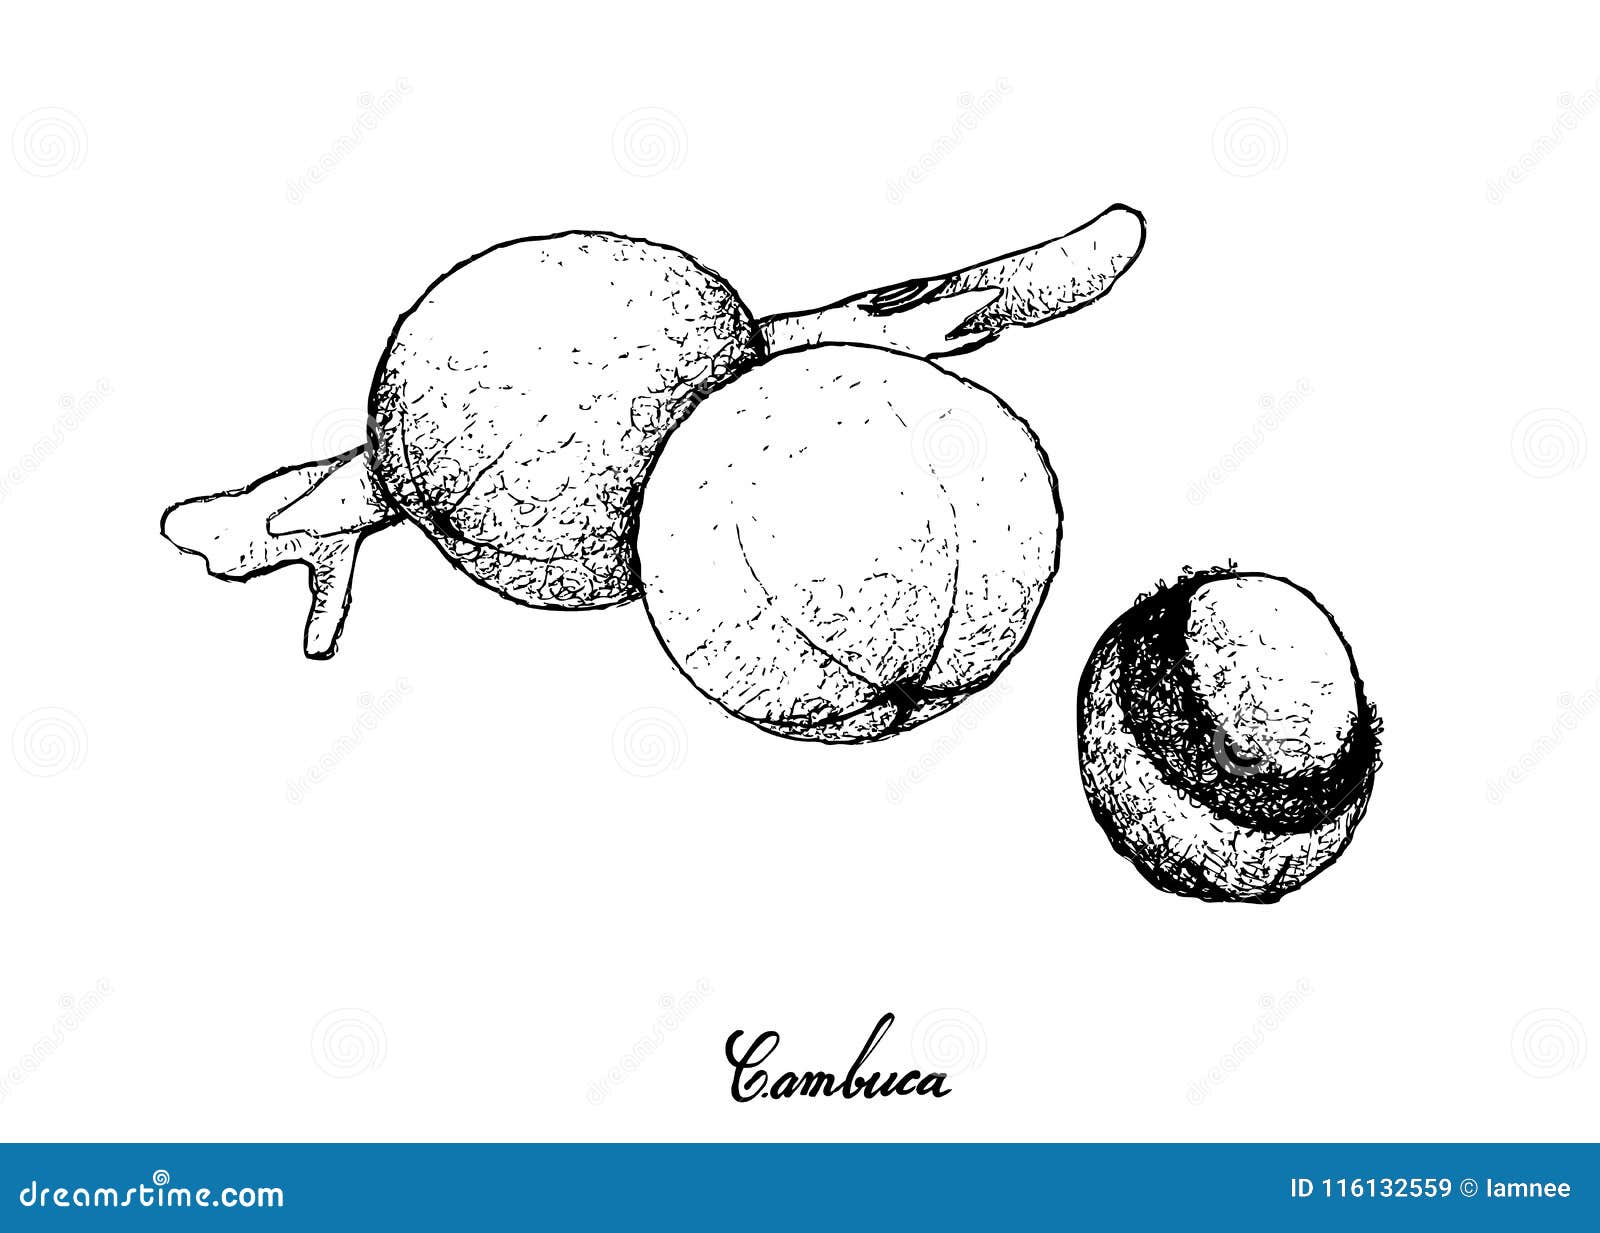 Hand Drawn of Cambuca Fruits on White Background Stock Vector ...